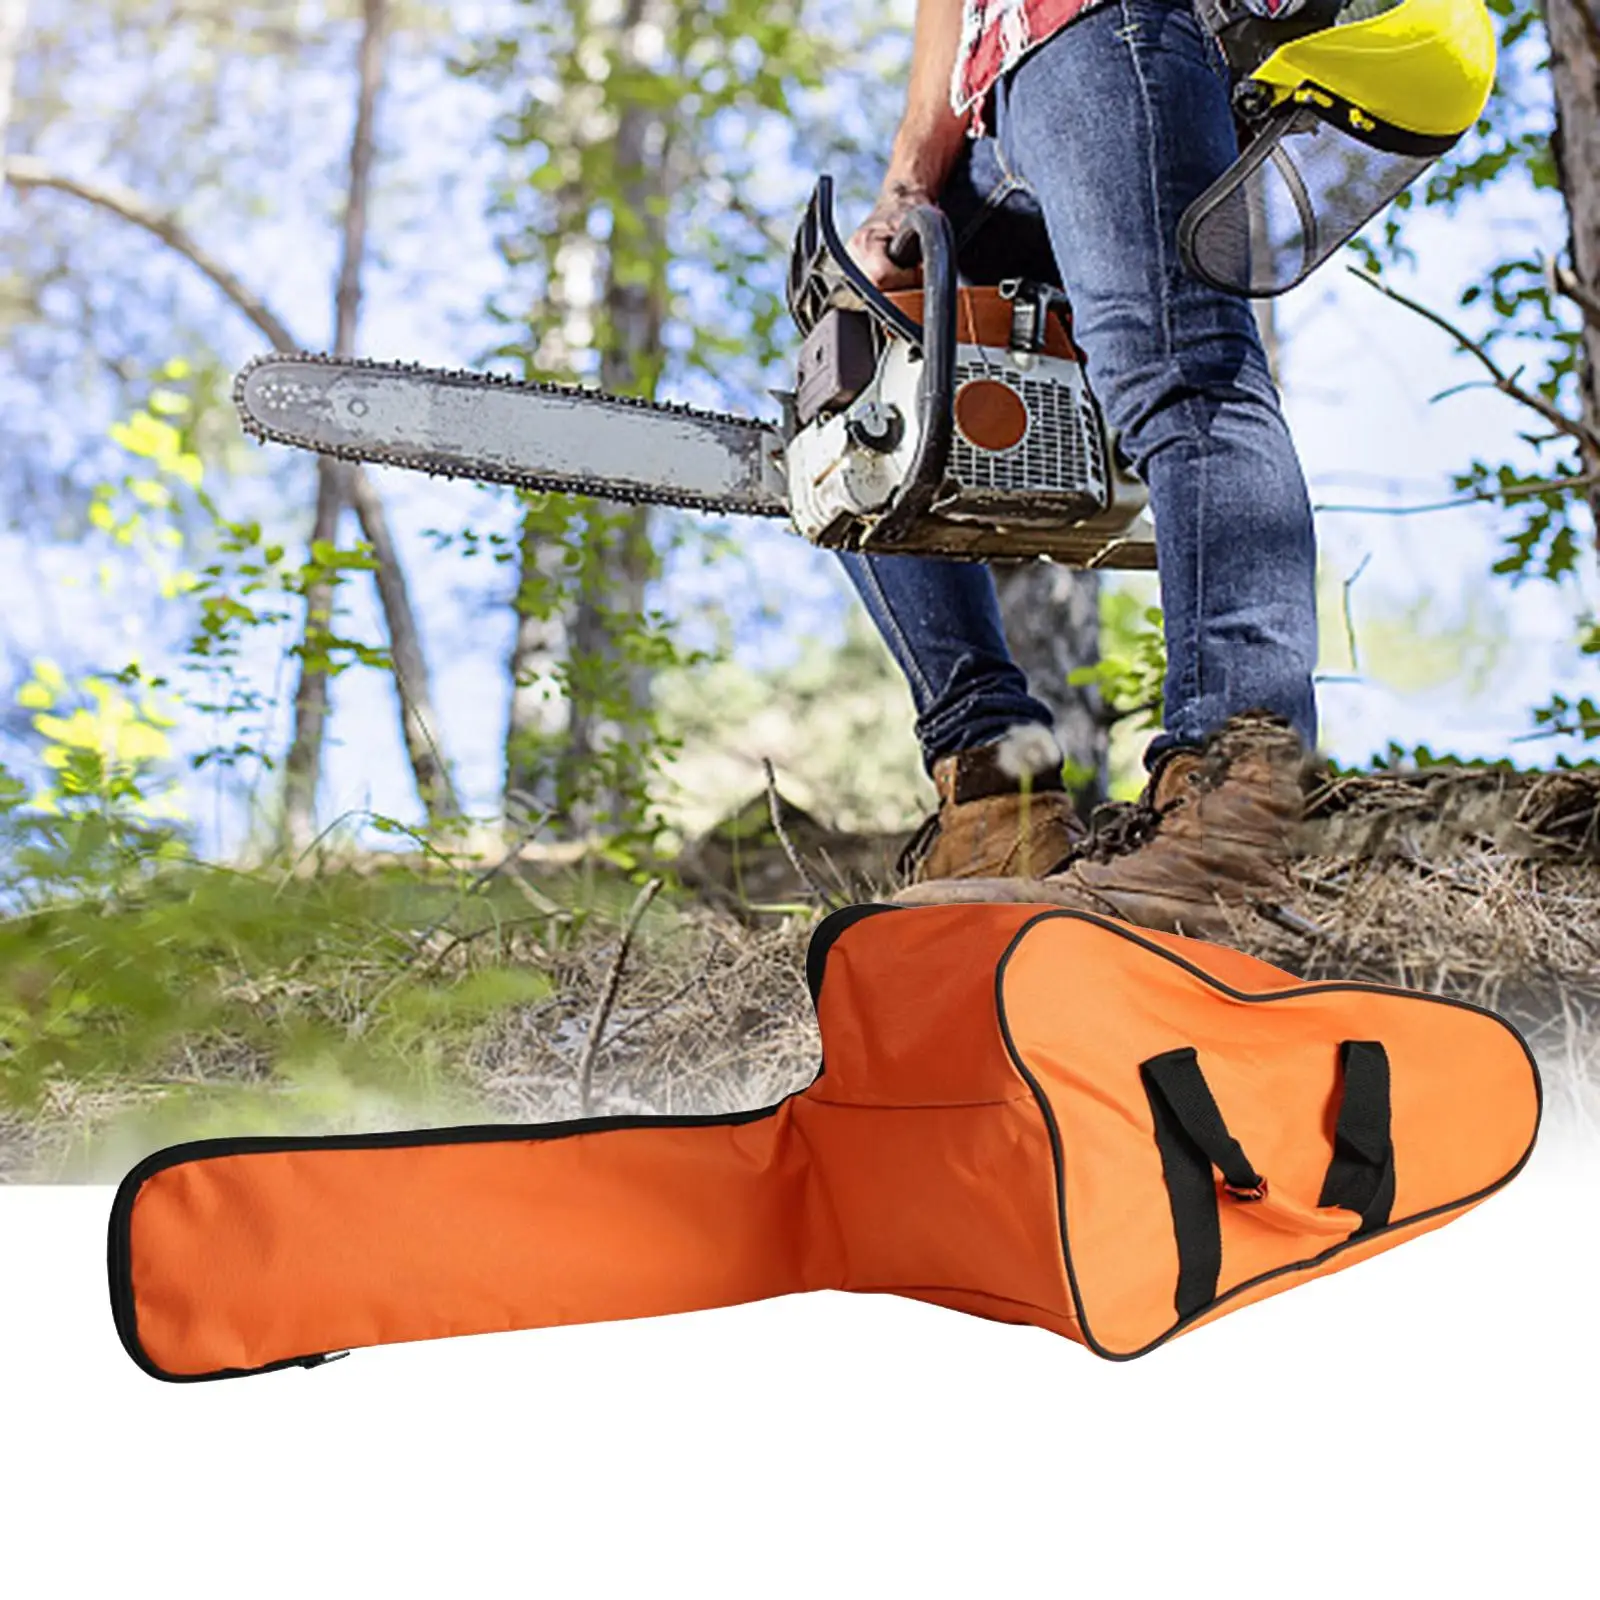 Portable Chainsaw Carrying Bag Case Full Protection Waterproof Oxford Carrying Tools Bag Protective Storage Bags Holder